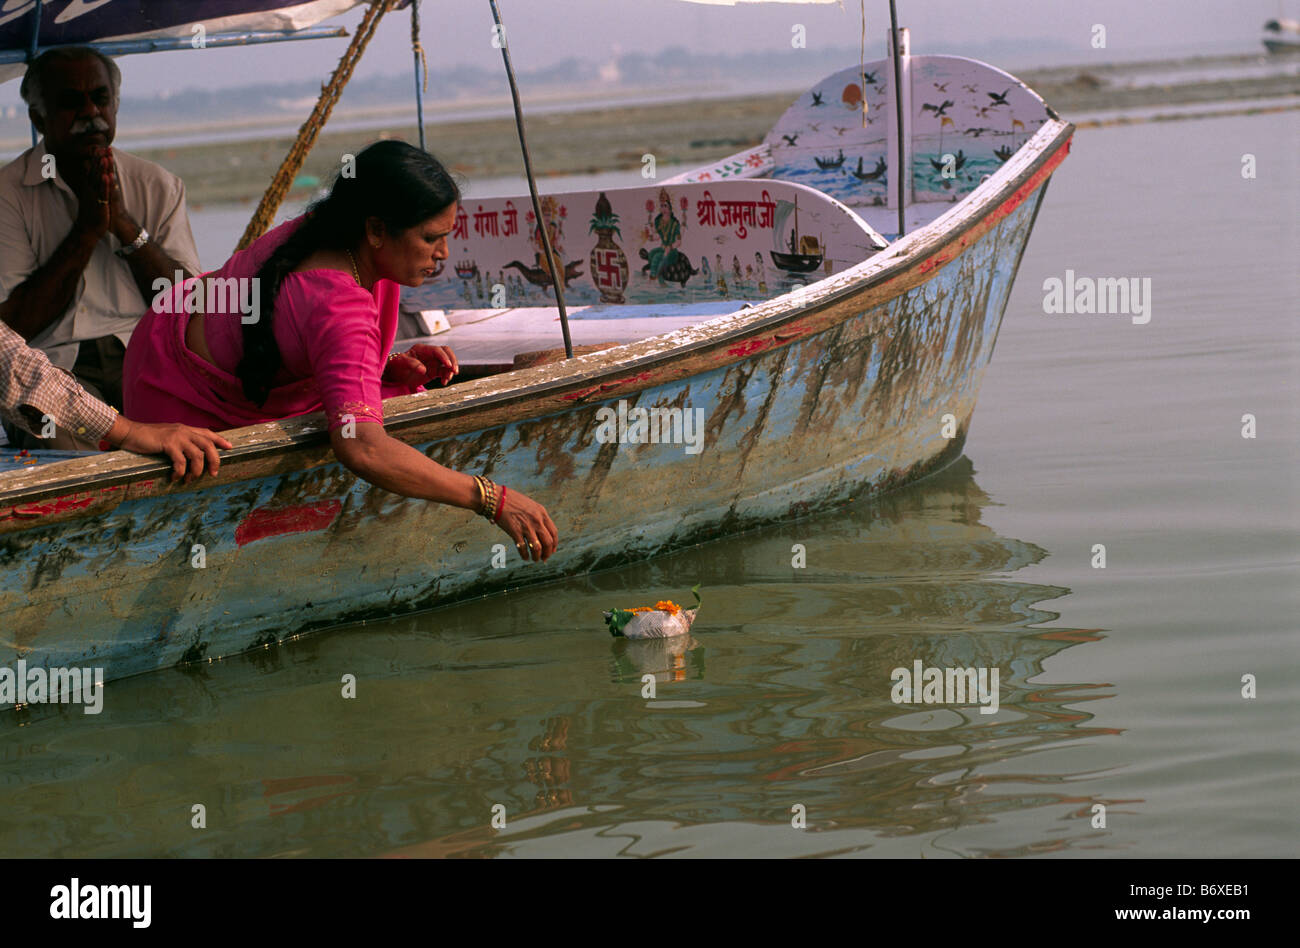 india, uttar pradesh, allahabad, sangam, people giving offerings at the confluence of the rivers ganges and yamuna Stock Photo